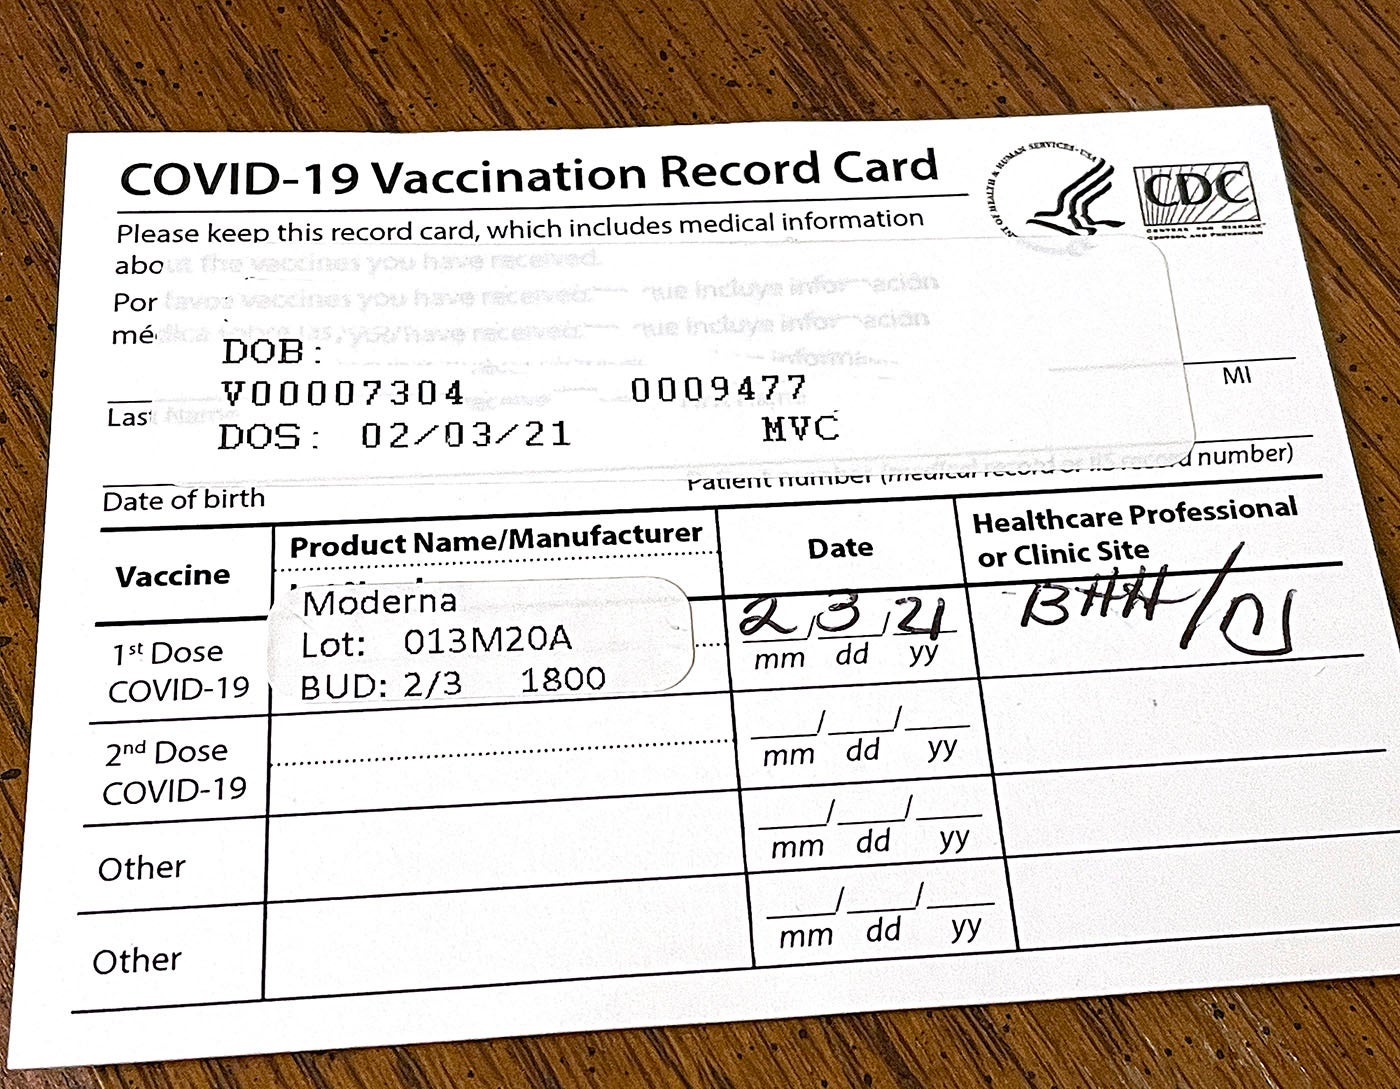 vaccination-card-needs-to-be-saved-kept-private-the-advocate